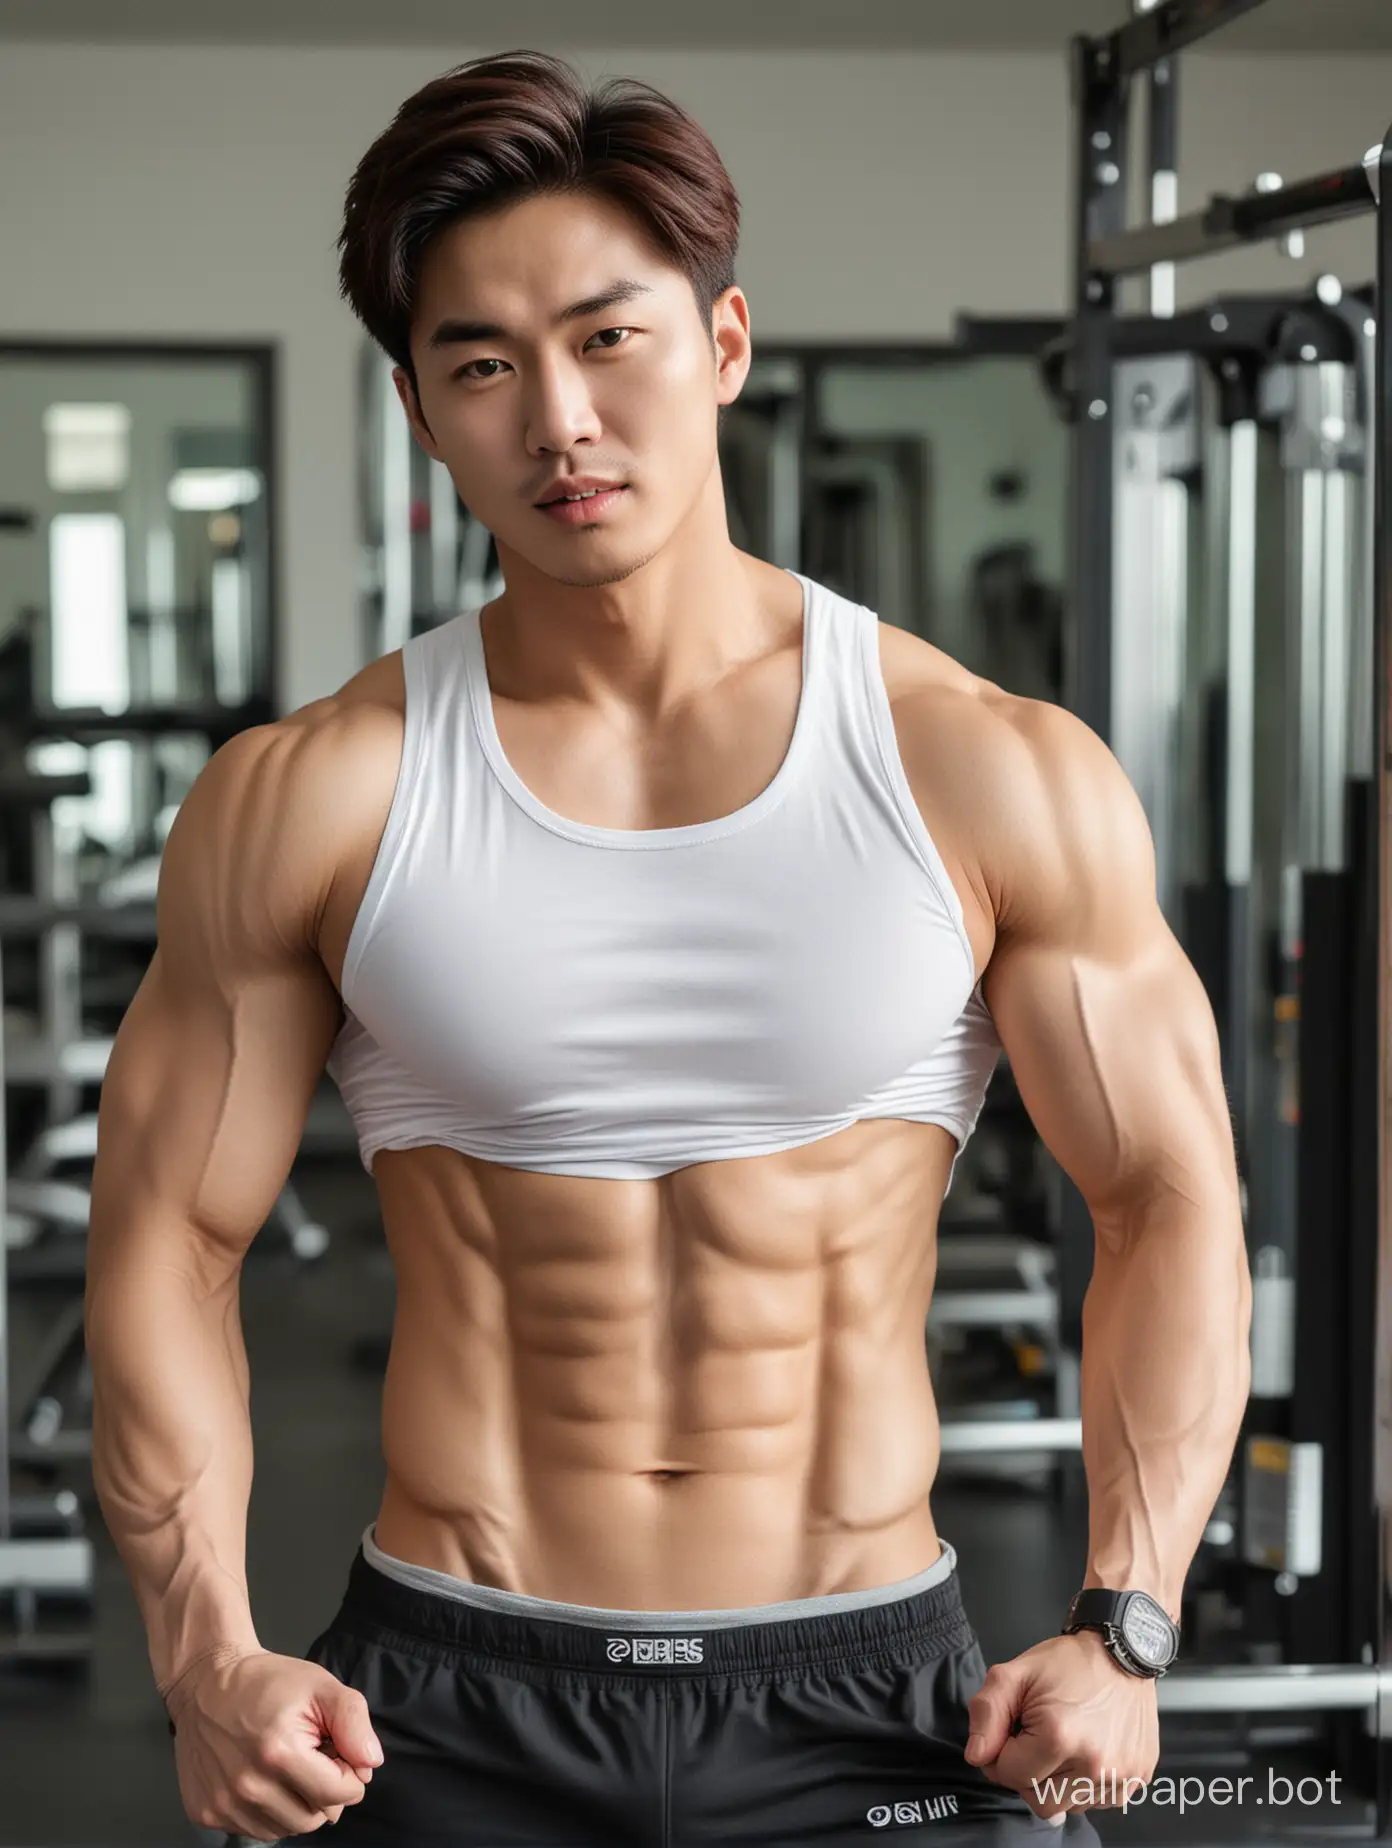 Korean-Fitness-Model-in-Gym-Showing-SixPack-Abs-in-White-Shirt